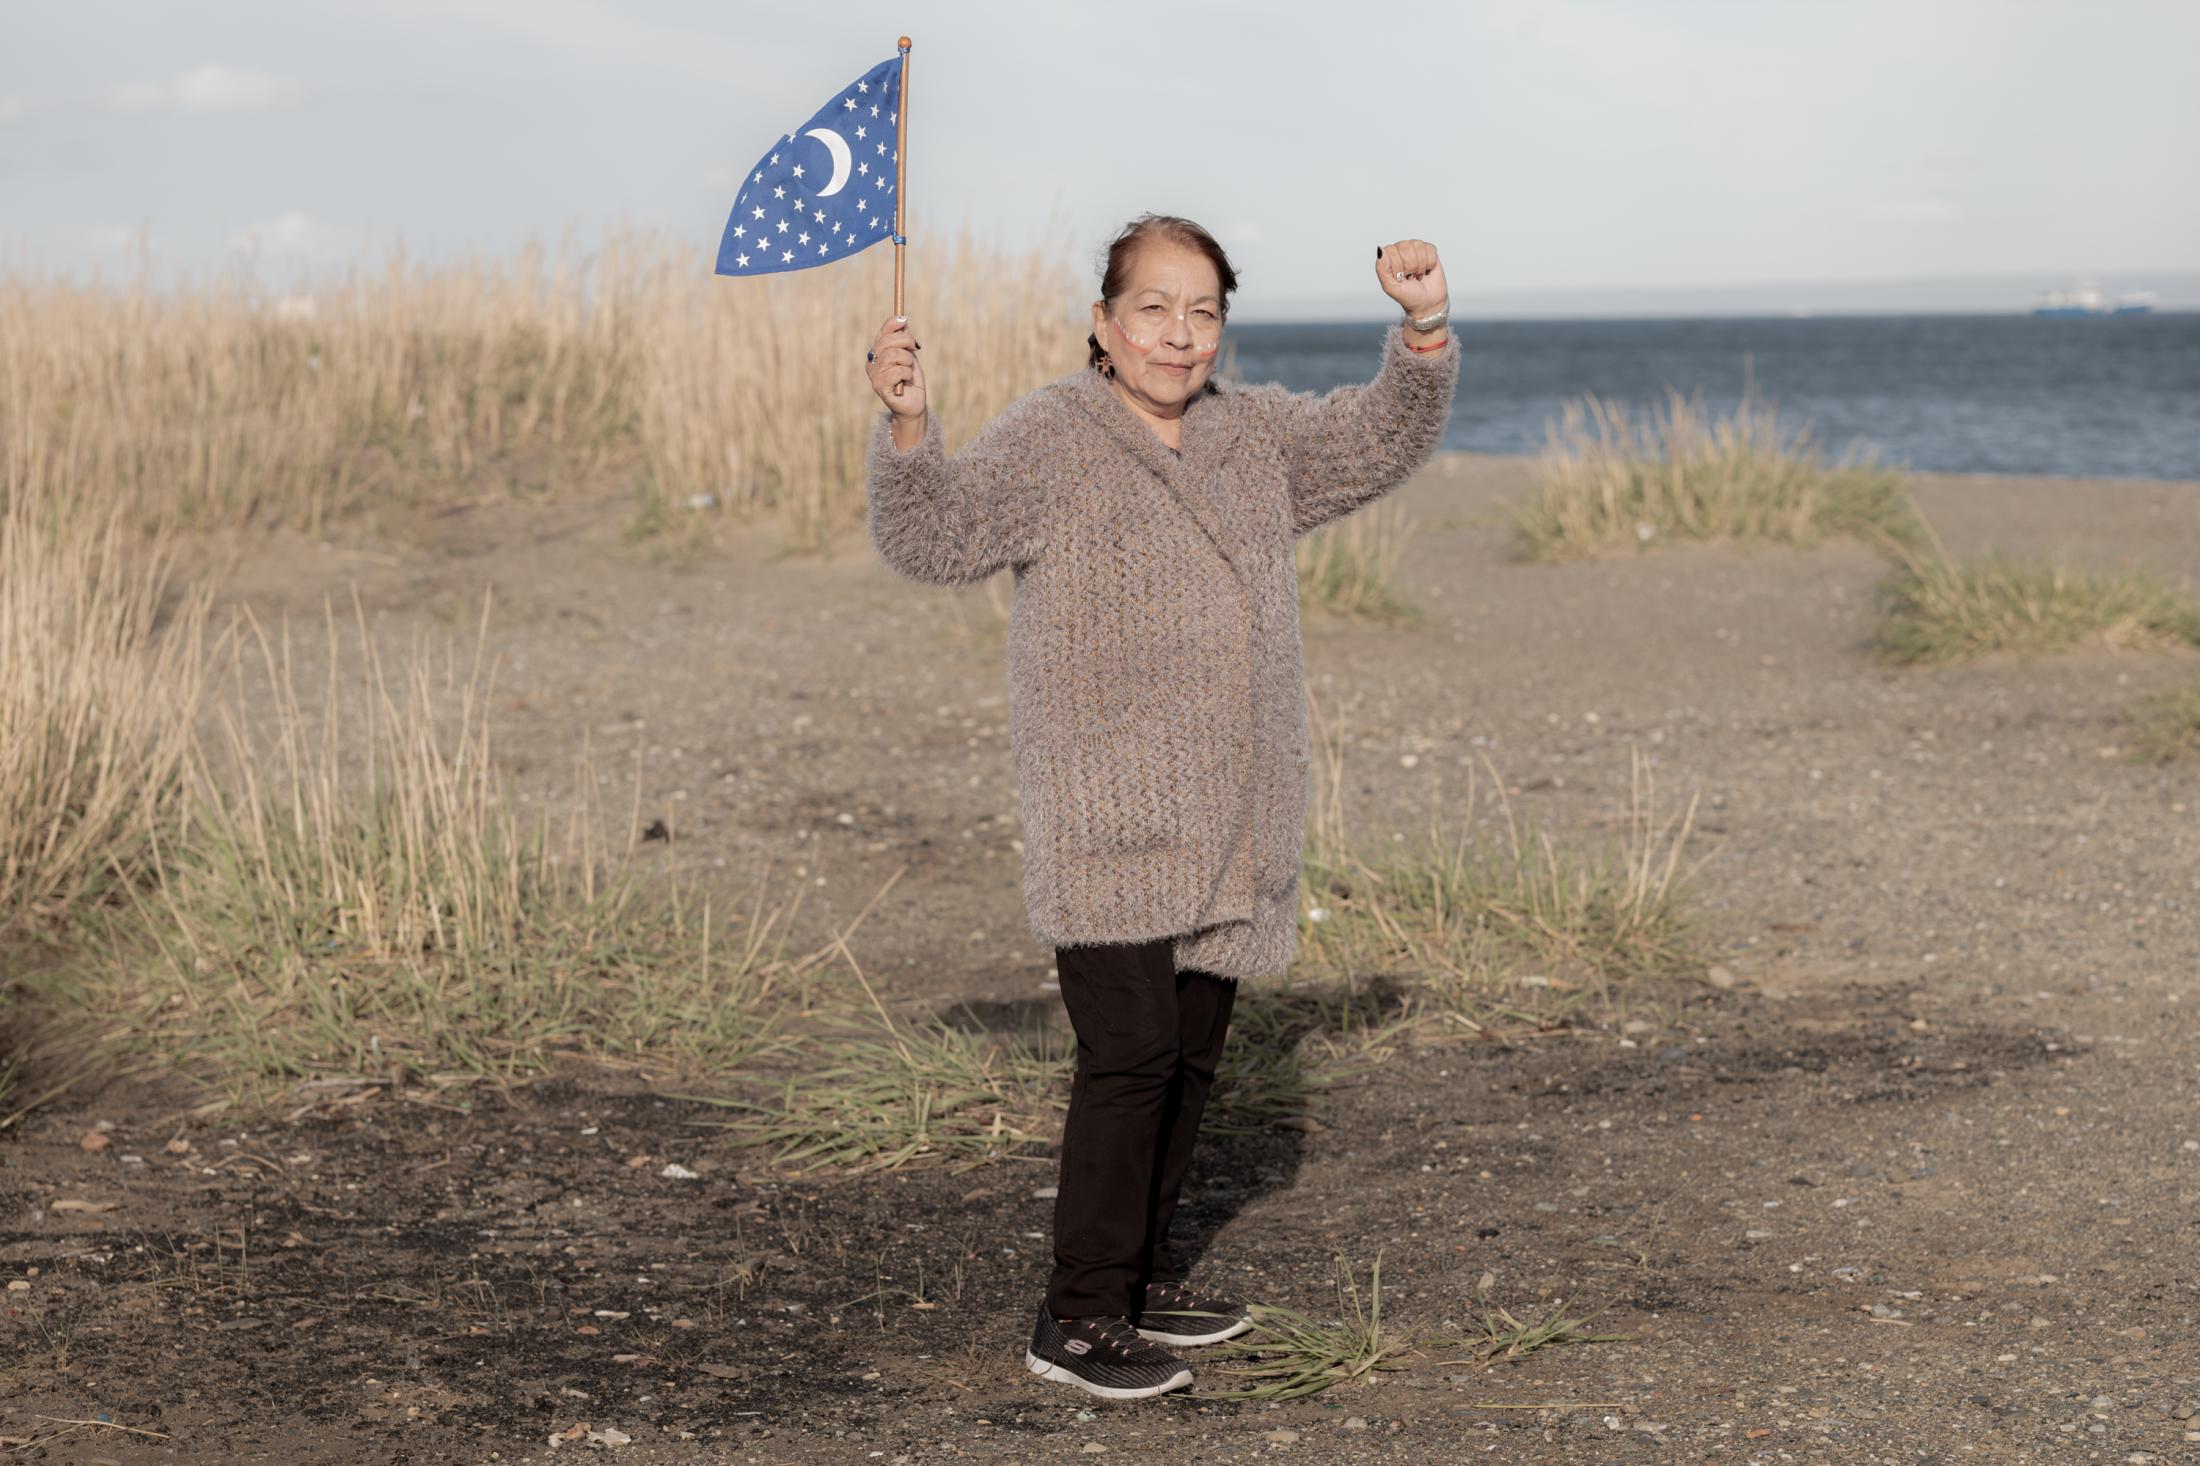 On the banks of the Strait of Magellan, Maria Margarita Vasquez Choque (Pilar) proudly holds the...